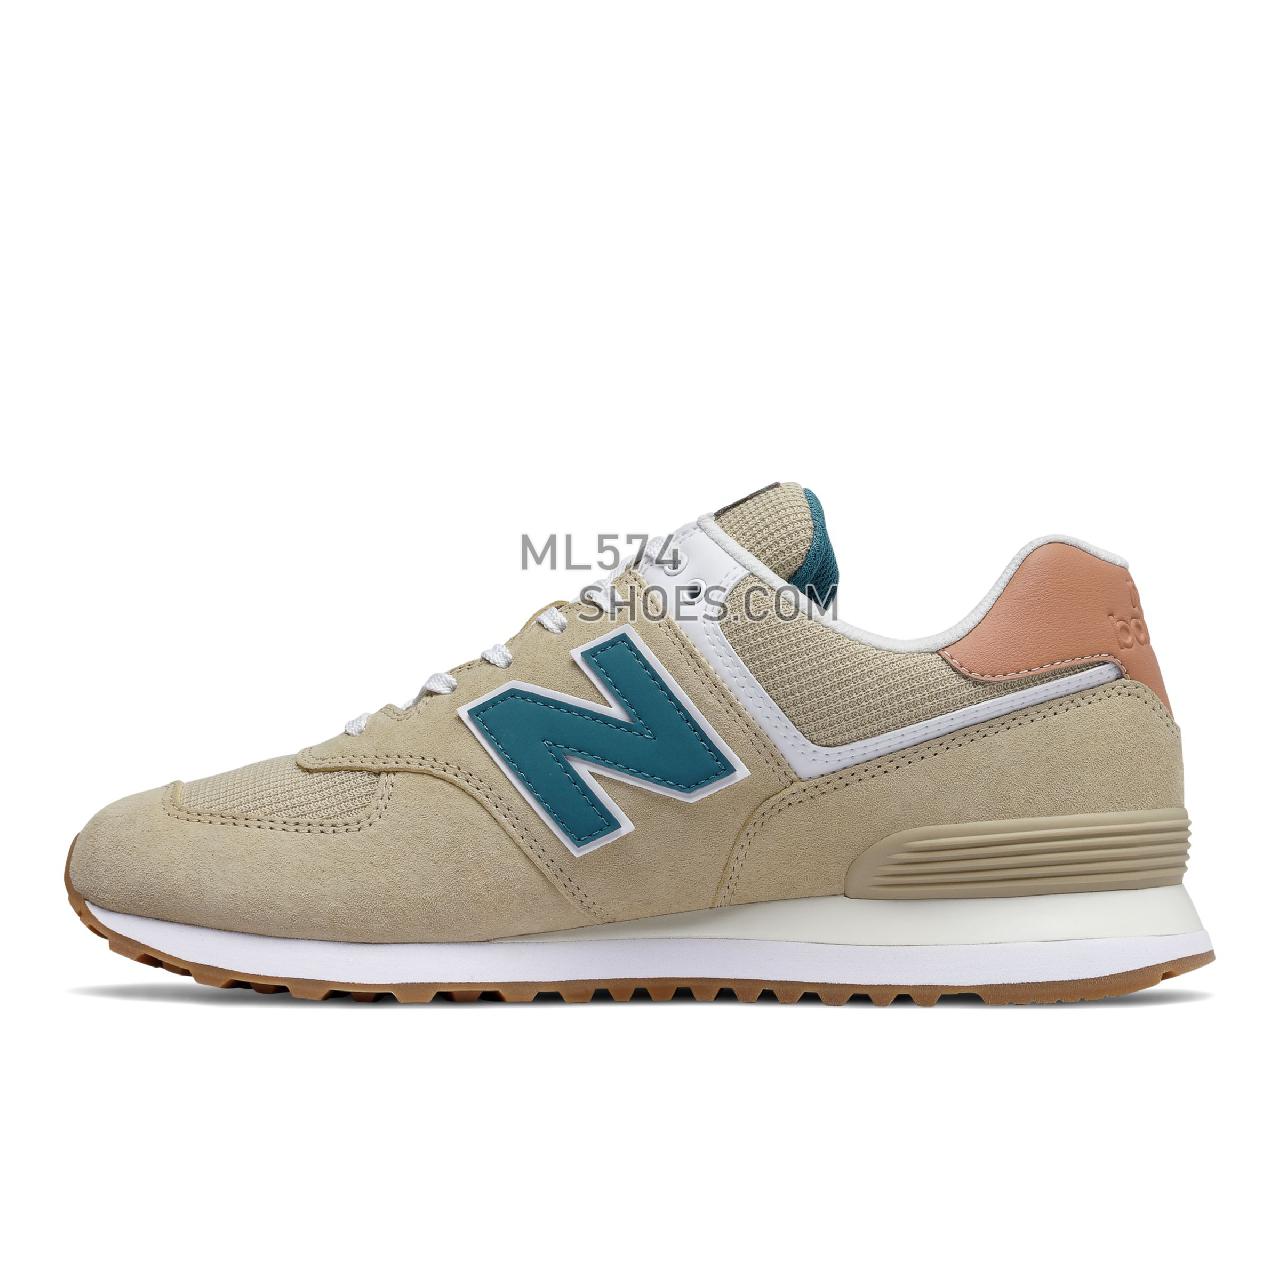 New Balance 574v2 - Men's Classic Sneakers - Incense with Faded Mahogany - ML574TYC